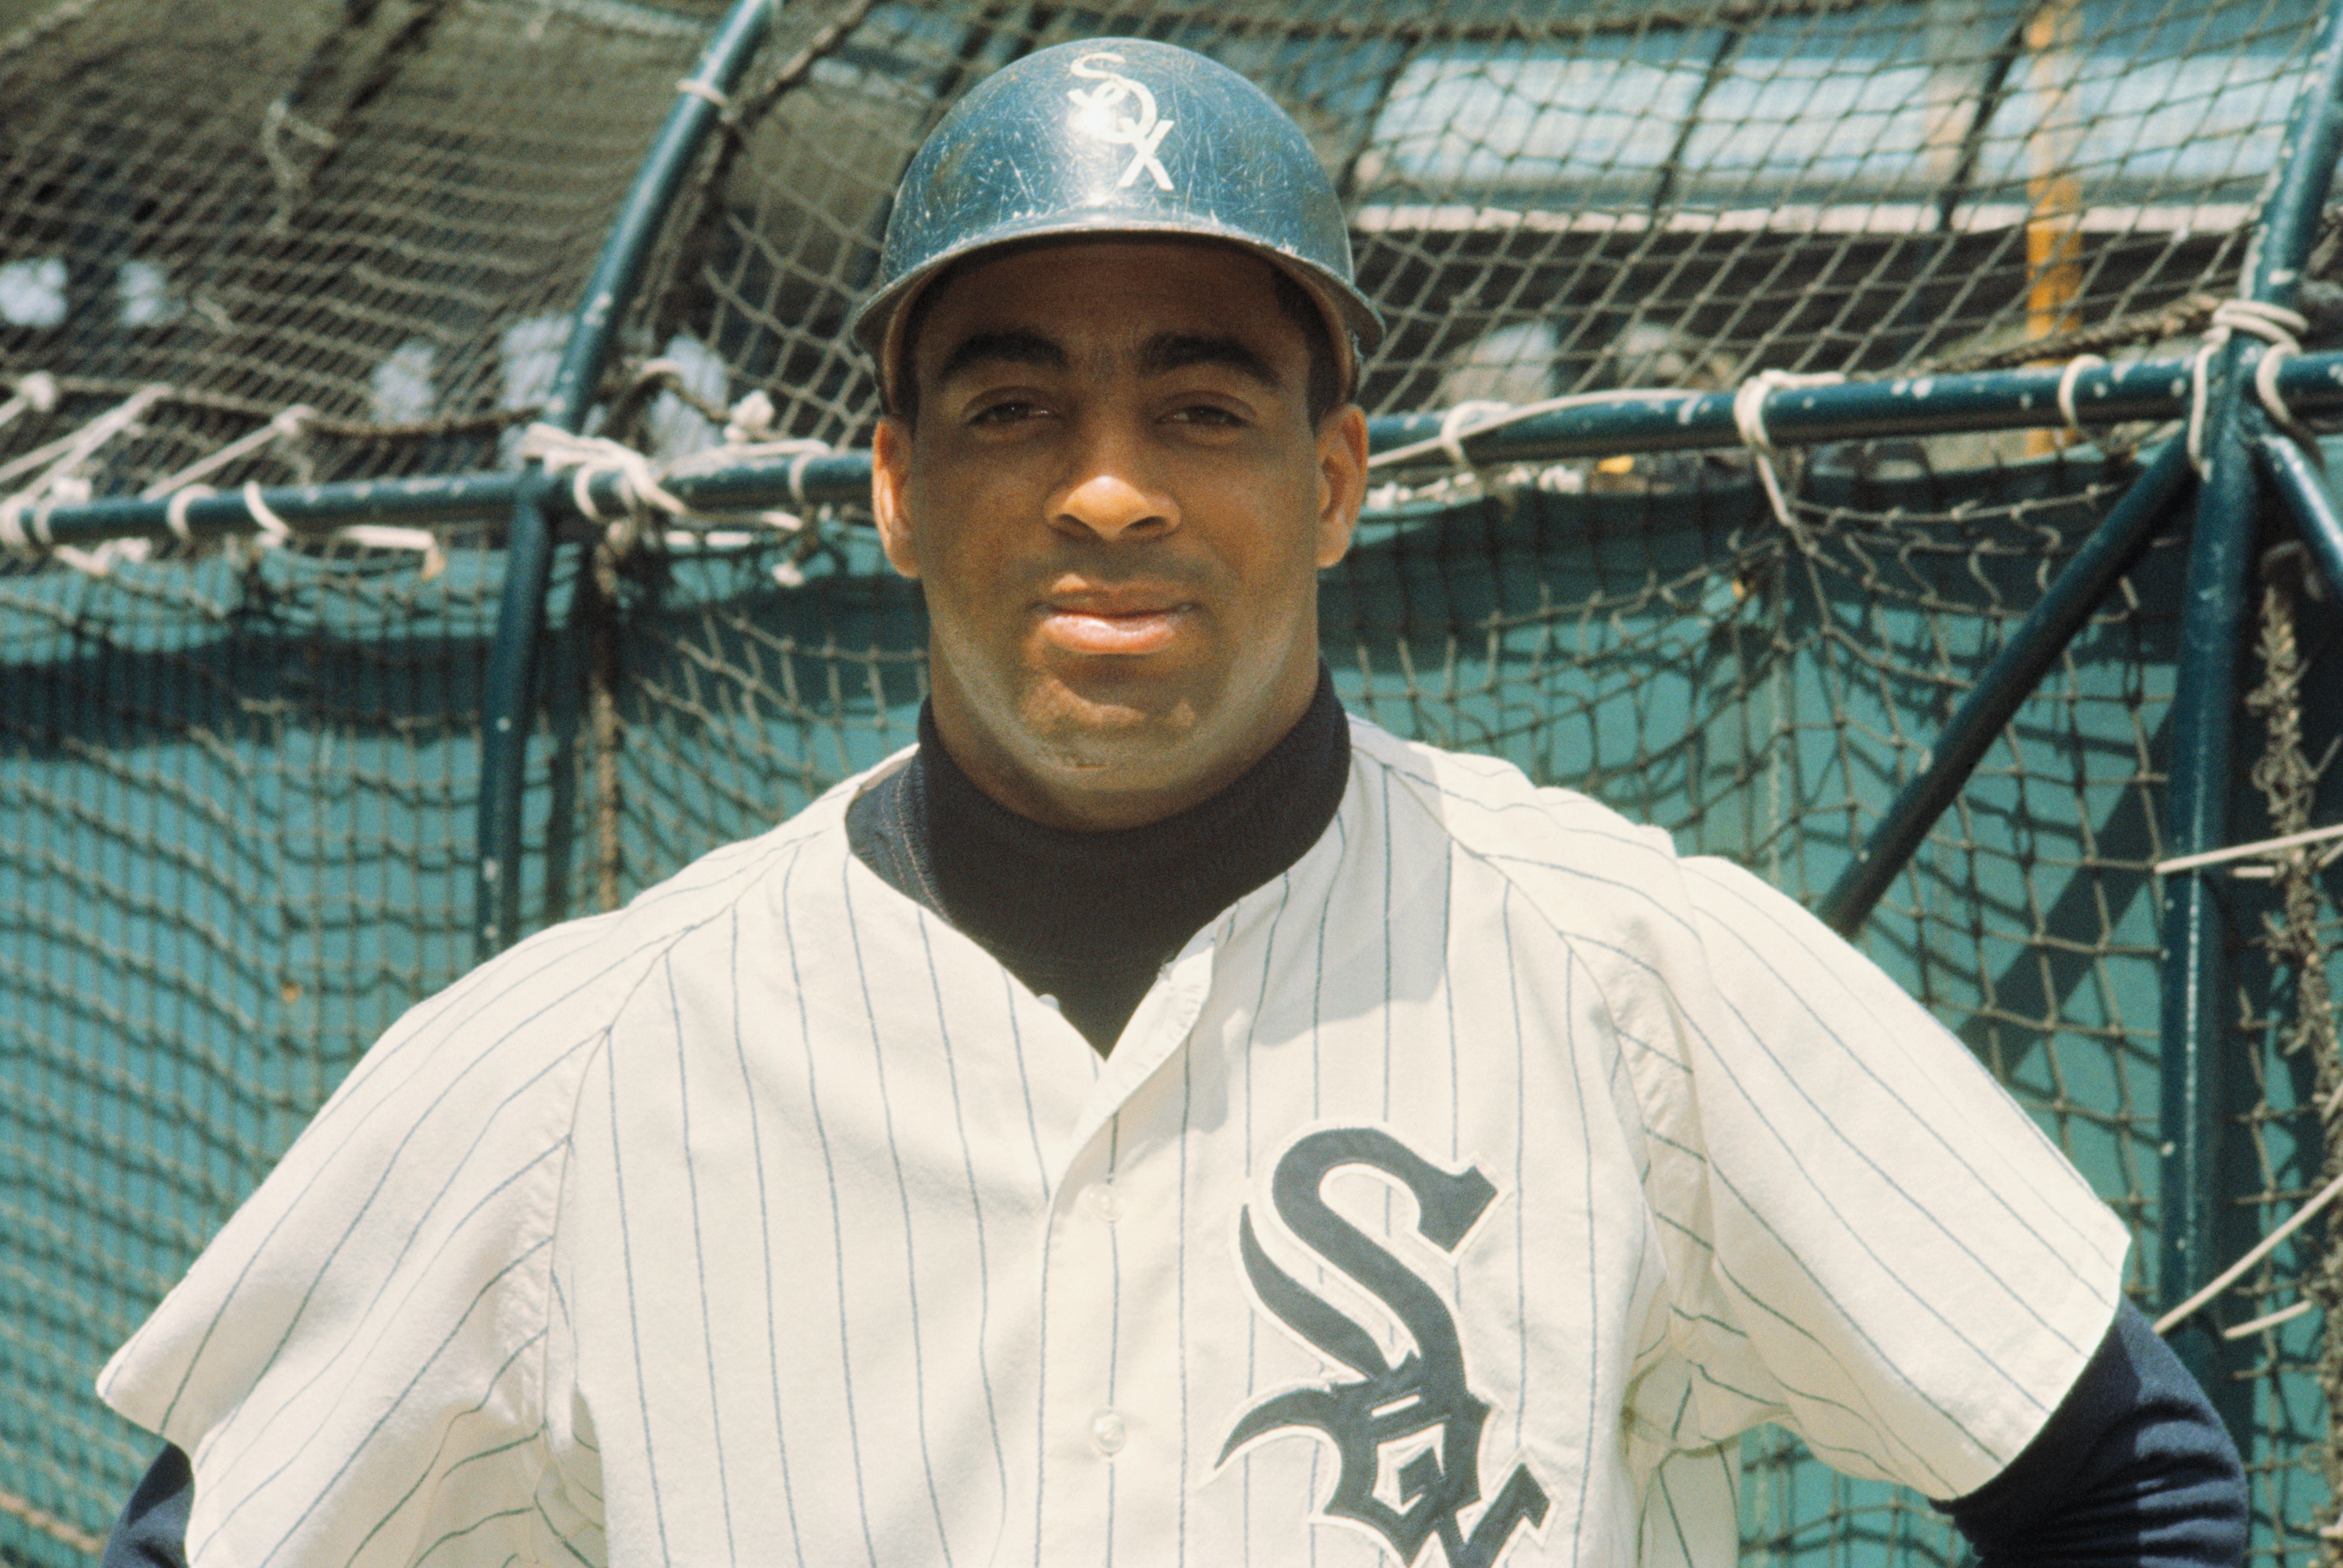 Chicago White Sox Outfielder Tommie Agee